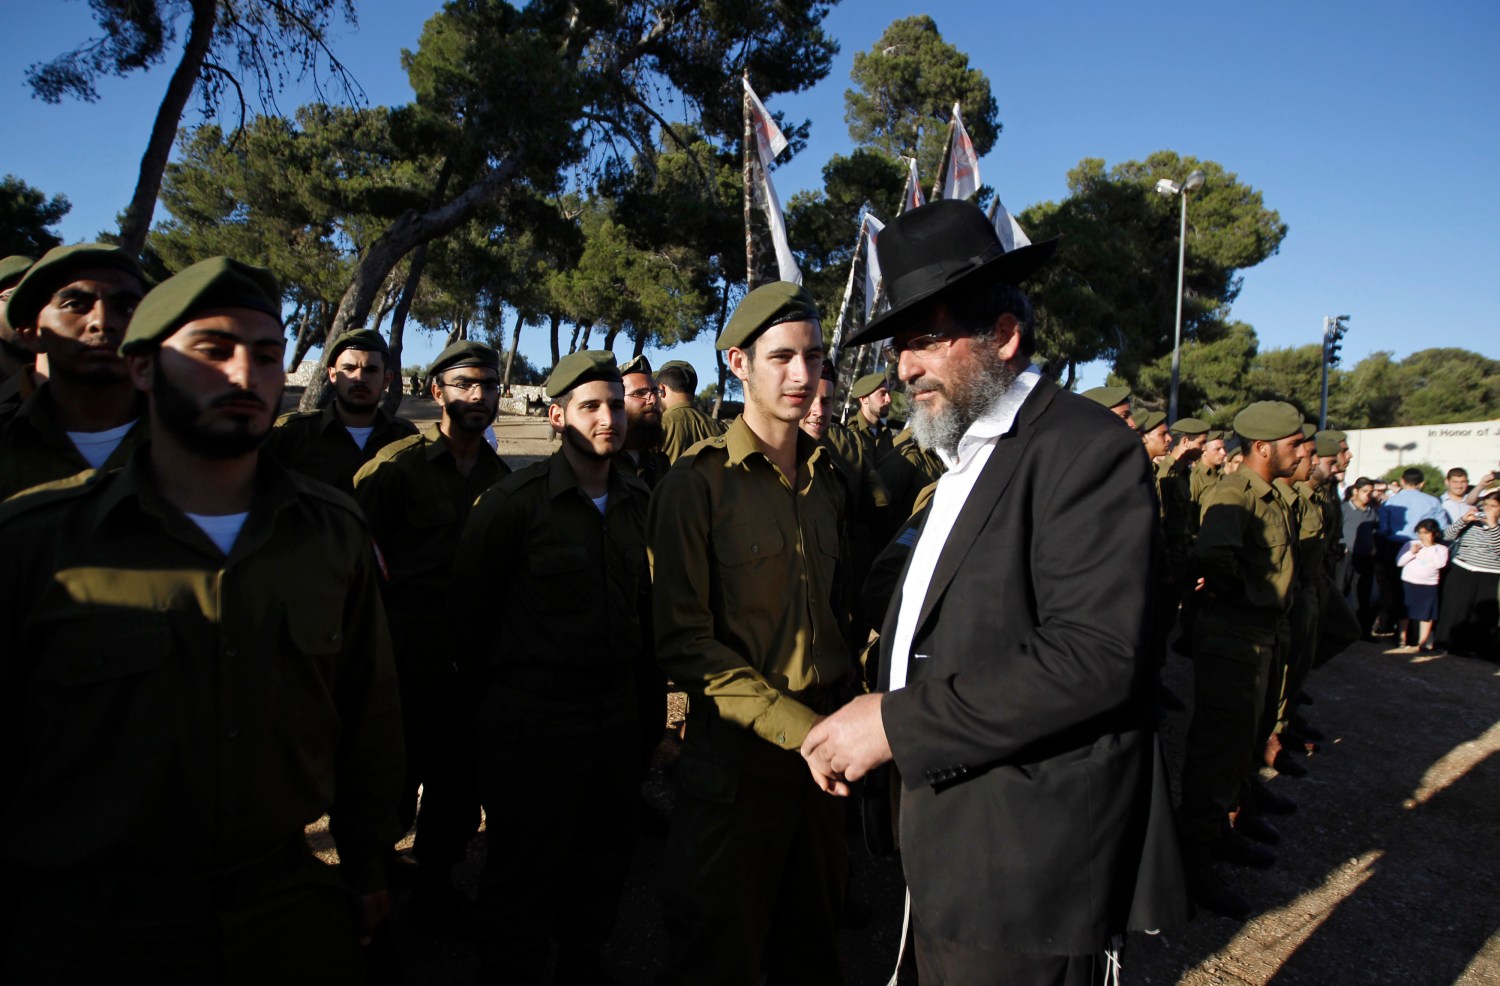 An ultra-Orthodox, or Haredi, Jewish man walks past Israeli soldiers of the Netzah Yehuda Haredi infantry battalion during their swearing-in ceremony in Jerusalem May 26, 2013, marking the end of their basic training in the Israeli Defense Forces. Israel clinched a deal on Wednesday to abolish wholesale exemptions from military service for Jewish seminary students, ending a brief crisis that divided the ruling coalition parties. Picture taken May 26, 2013. REUTERS/Ammar Awad (JERUSALEM - Tags: RELIGION MILITARY POLITICS)